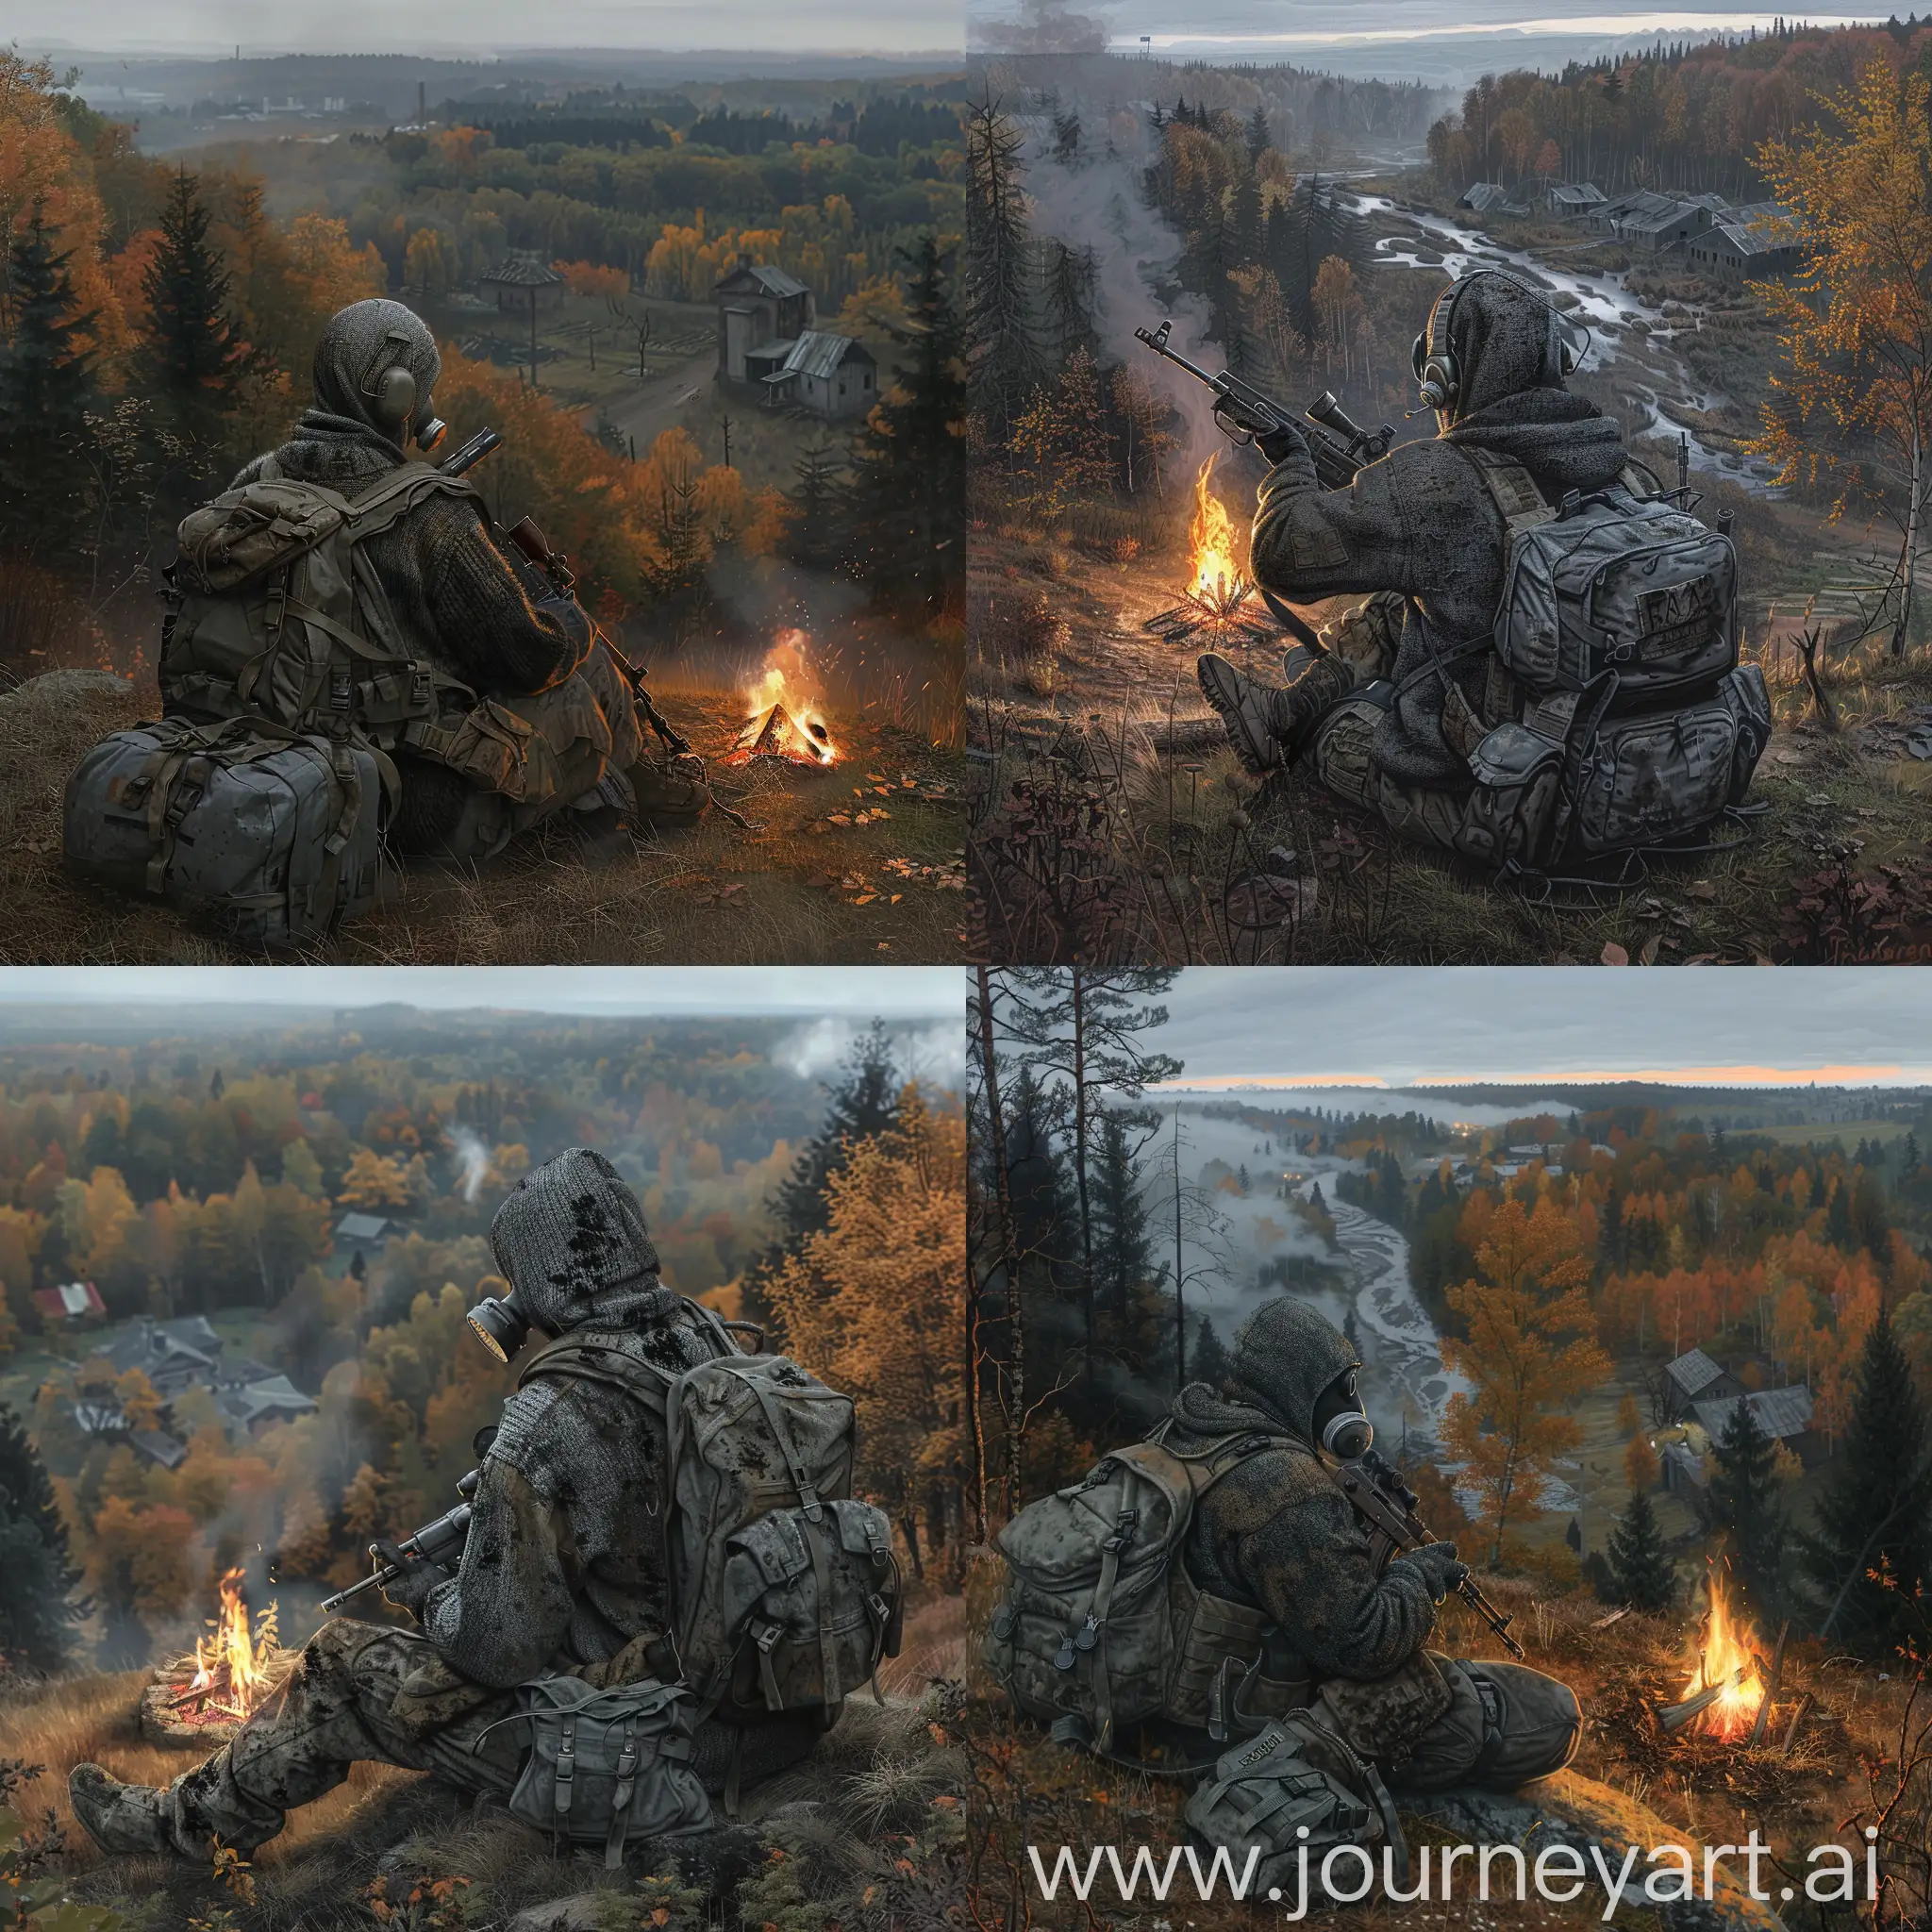 Stalker art,  stalker are sitting on a hill by a campfire, stalker is wearing a old soviet dark gray dirty sweater, military unloading is worn over the sweater, a gasmask on his face, he has a rifle in his hands, a small gray backpack on his back, the weather is gloomy autumn, from the hill, where the stalker are sitting, there is a view of the forest and an abandoned Soviet village standing in the distance.